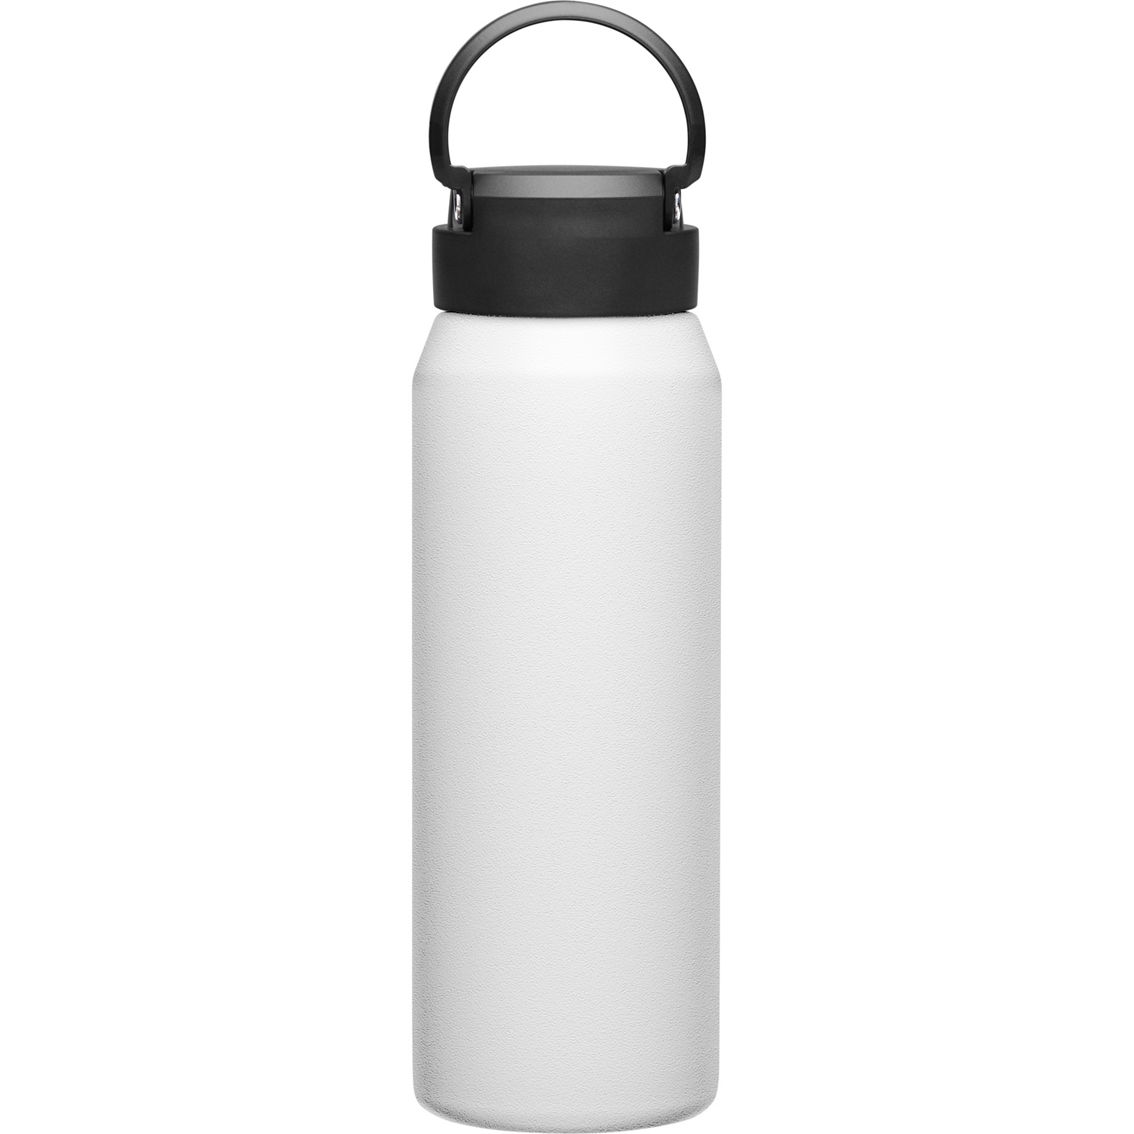 Camelbak Fit Cap Insulated Stainless Steel Water Bottle 32 oz. - Image 2 of 8